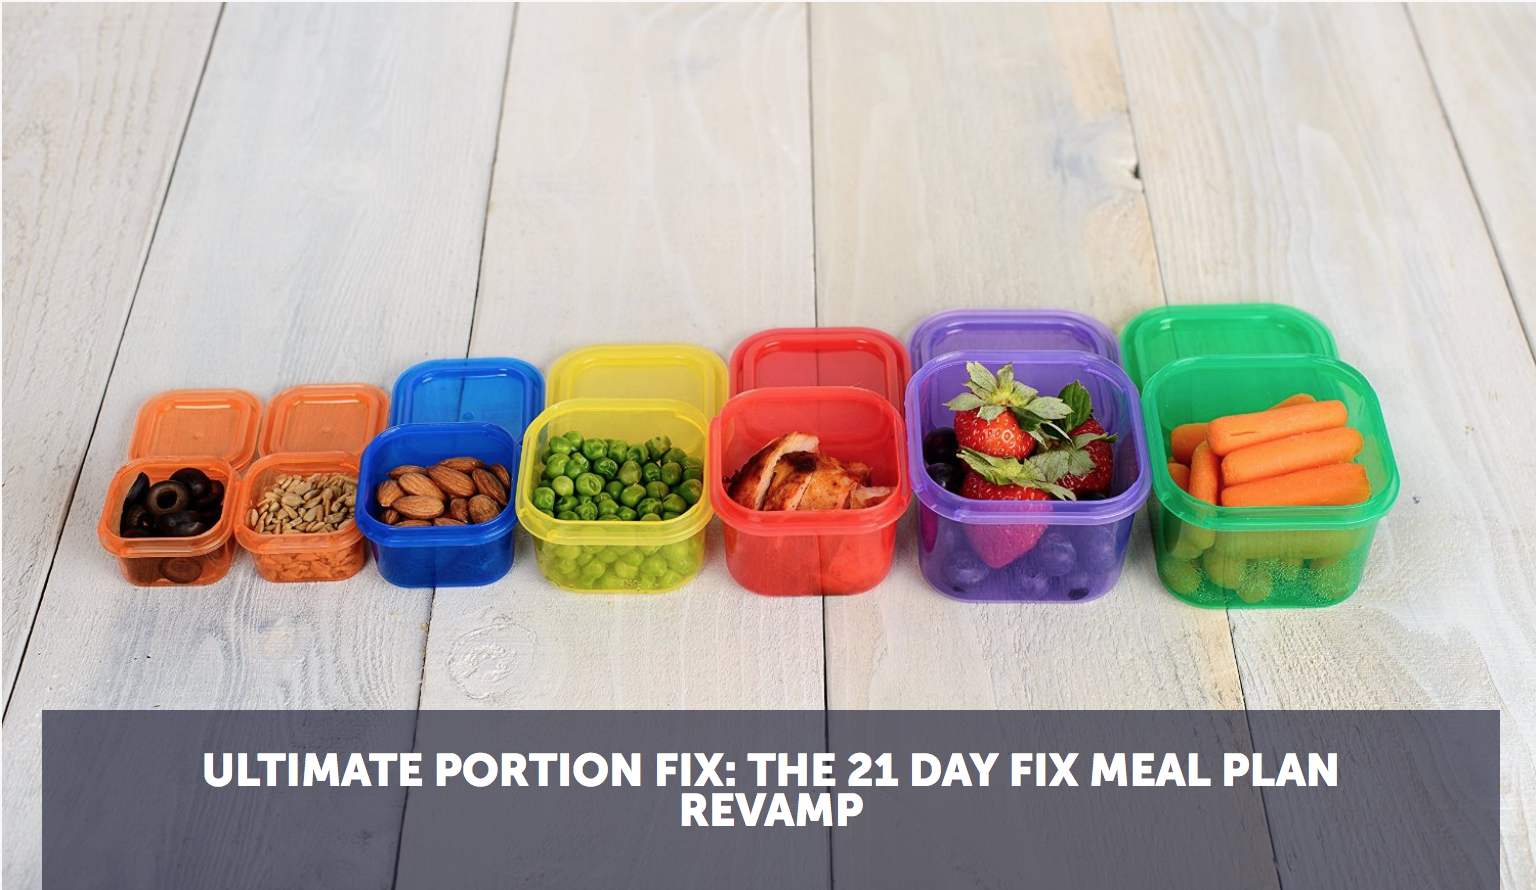 Beachbody 21 Day Fix Meal Plan Food Portion Containers - NEW